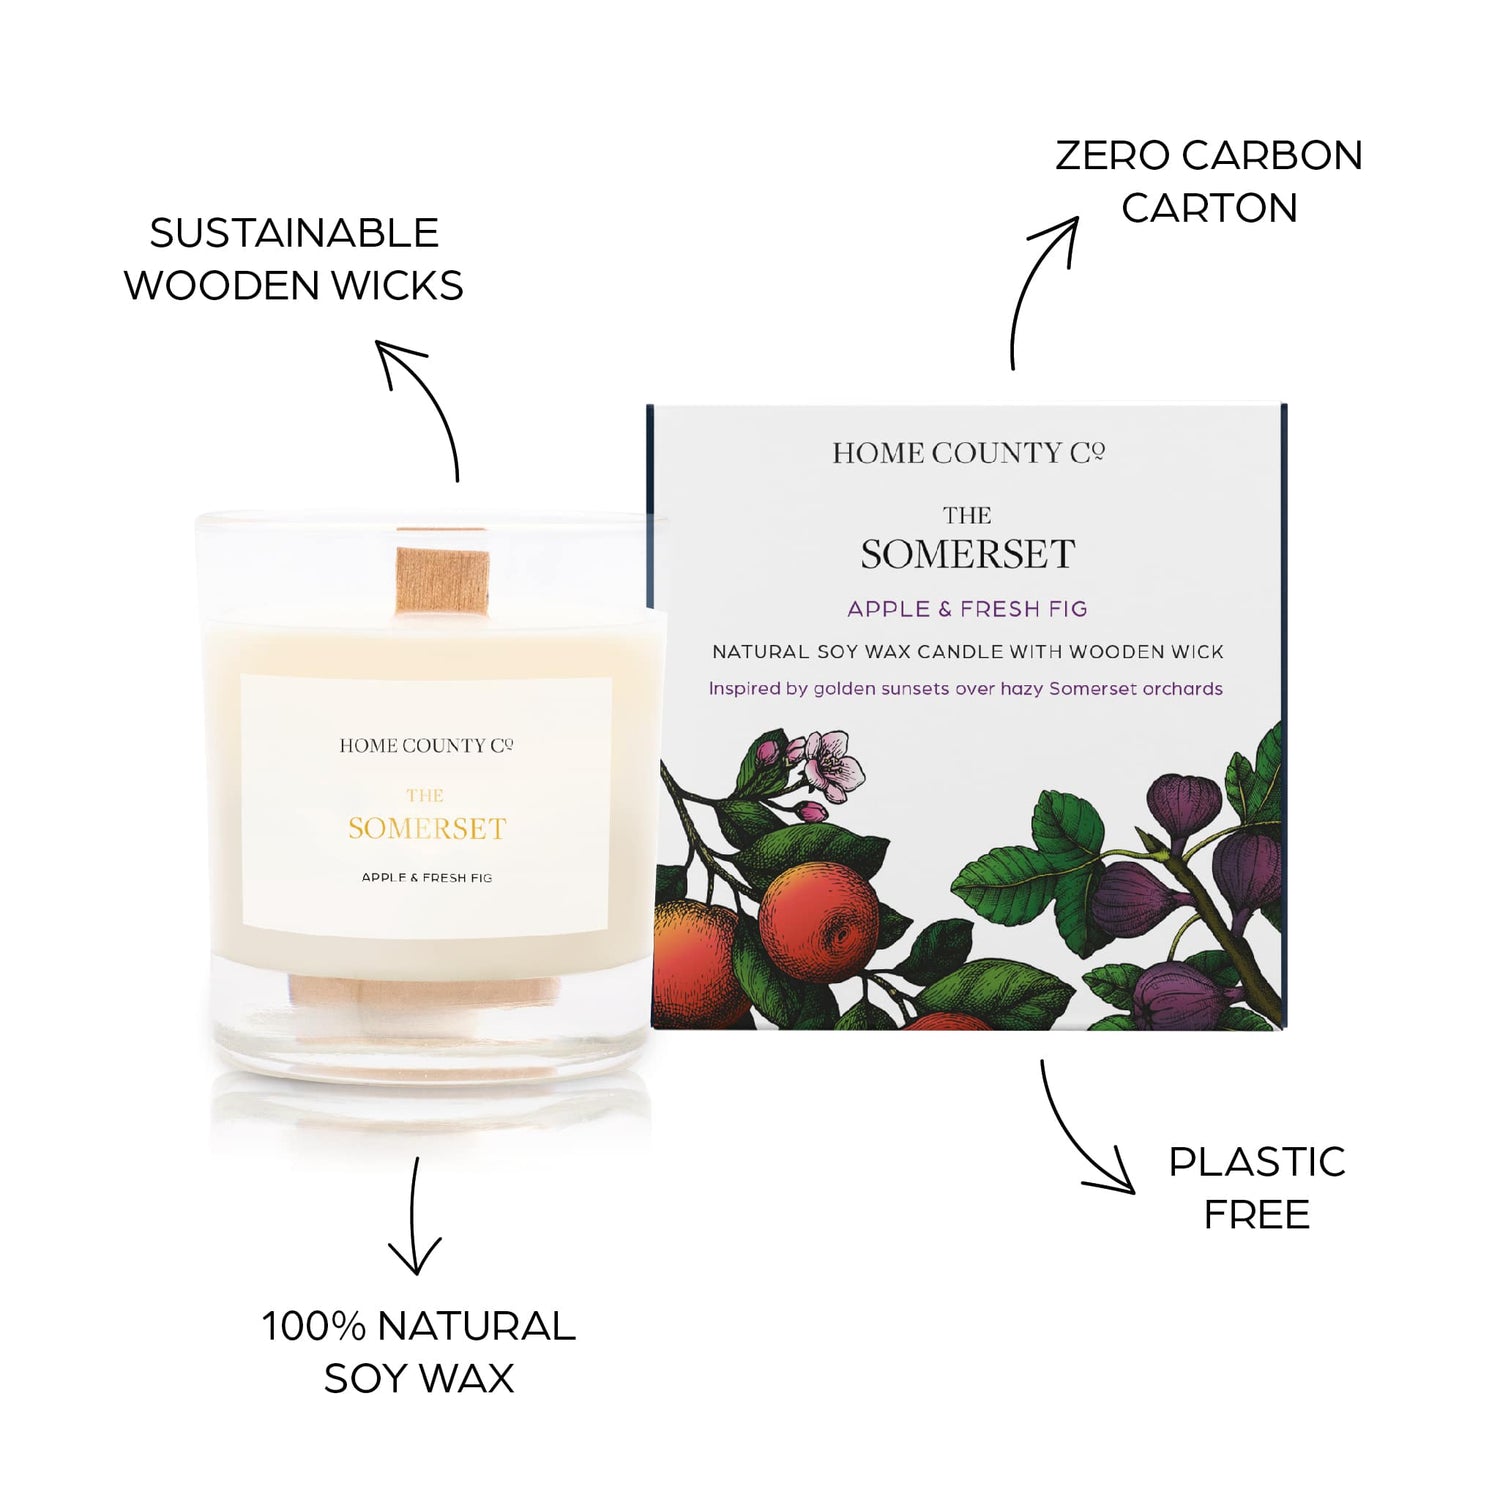 Sustainable candle credentials are shown around the fig scented candle image - sustainable wooden wicks, zero carbon carton, 100% natural soy wax, plastic free